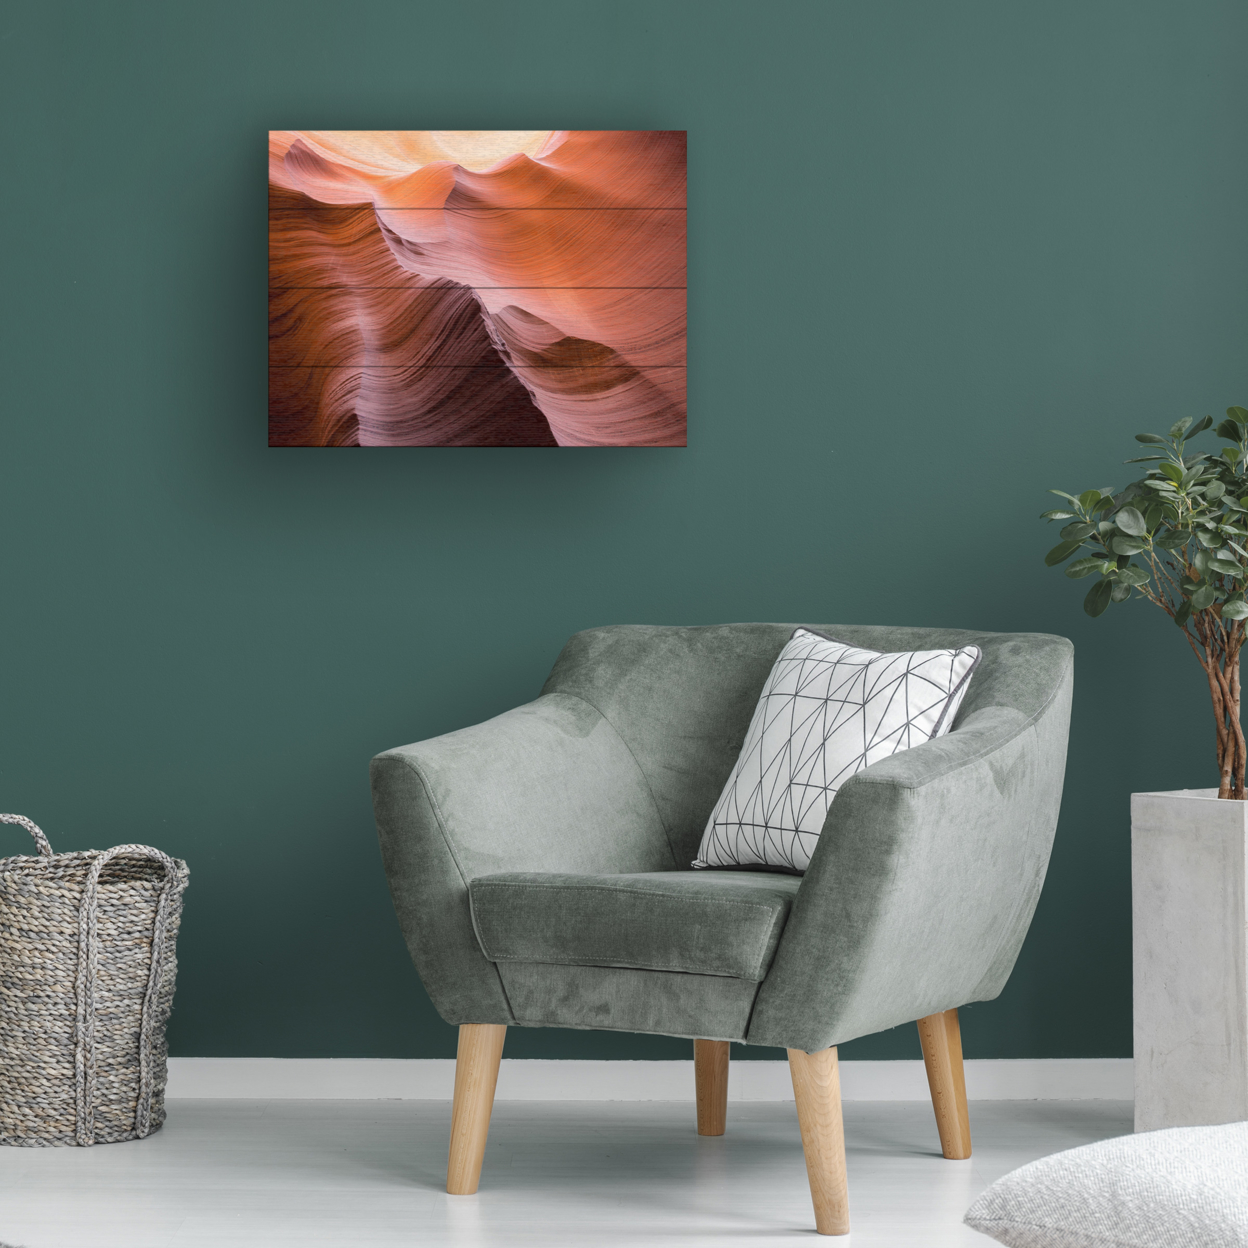 Wall Art 12 X 16 Inches Titled Smooth II Ready To Hang Printed On Wooden Planks